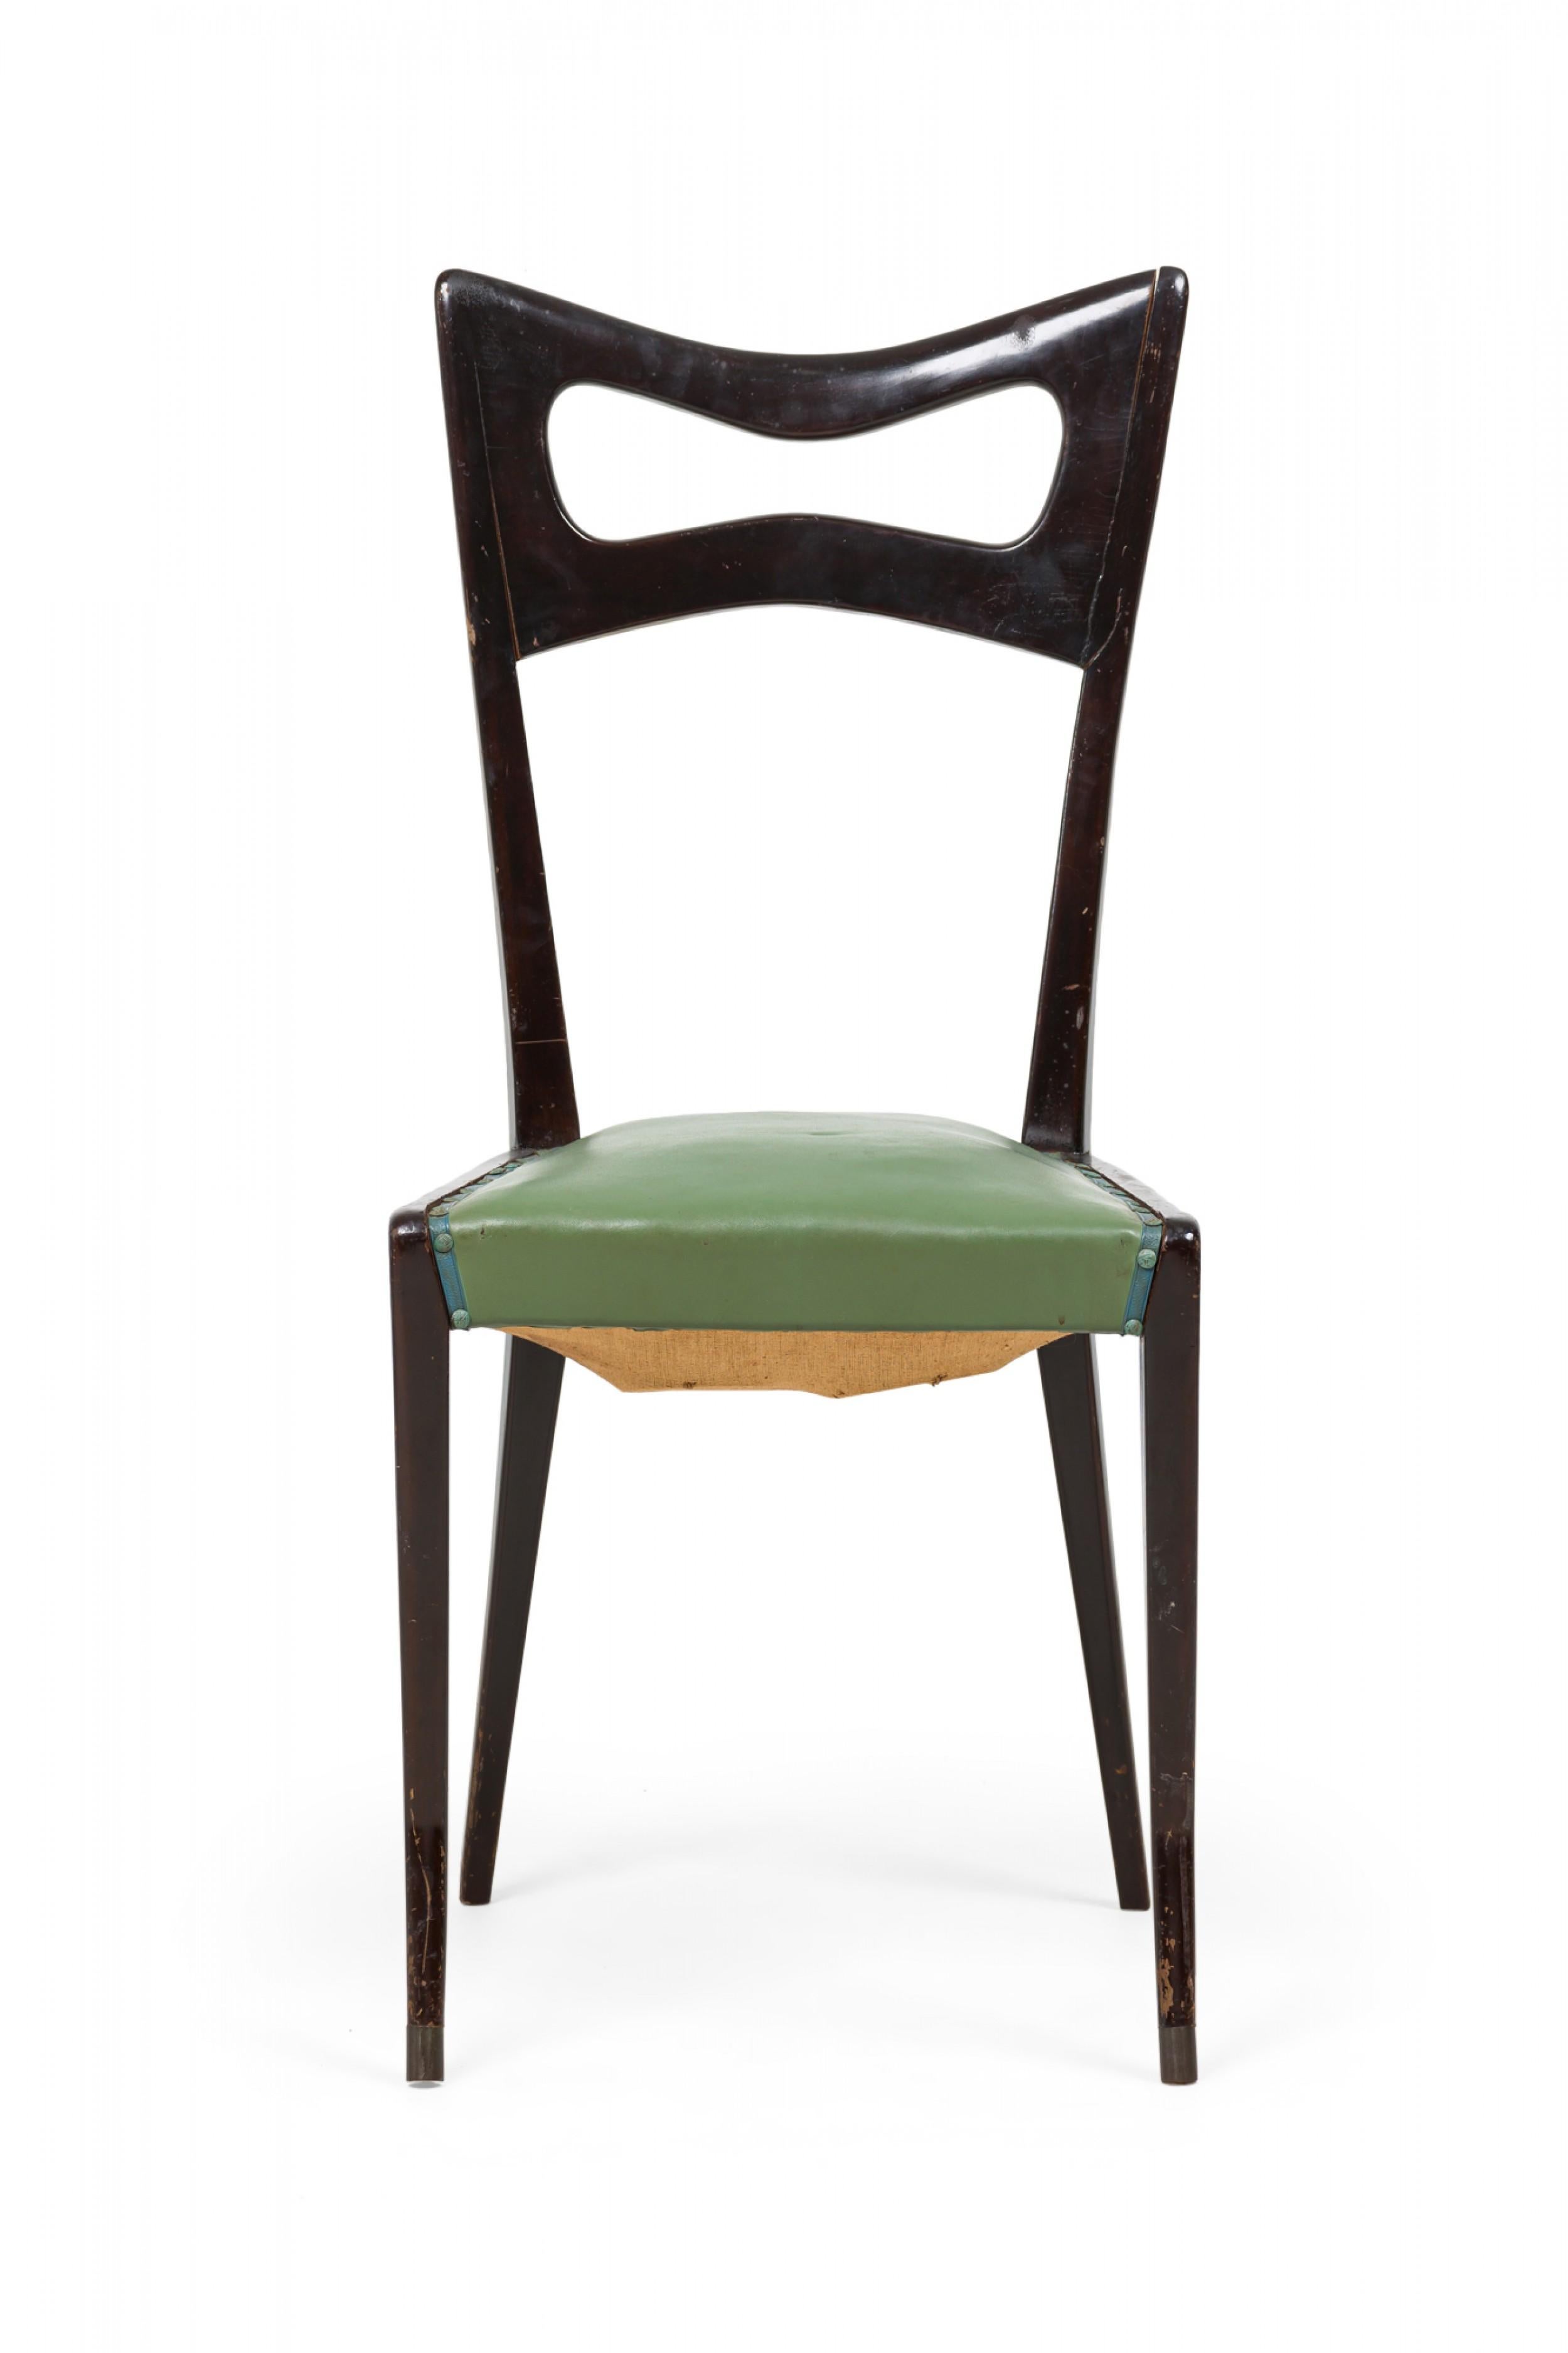 SET of 8 midcentury Italian dining chairs featuring ebonized frames with shaped openwork backrests, green leather upholstered seats and splayed front legs with a subtle angular sweep. (Ico Parisi) (PRICED AS SET).